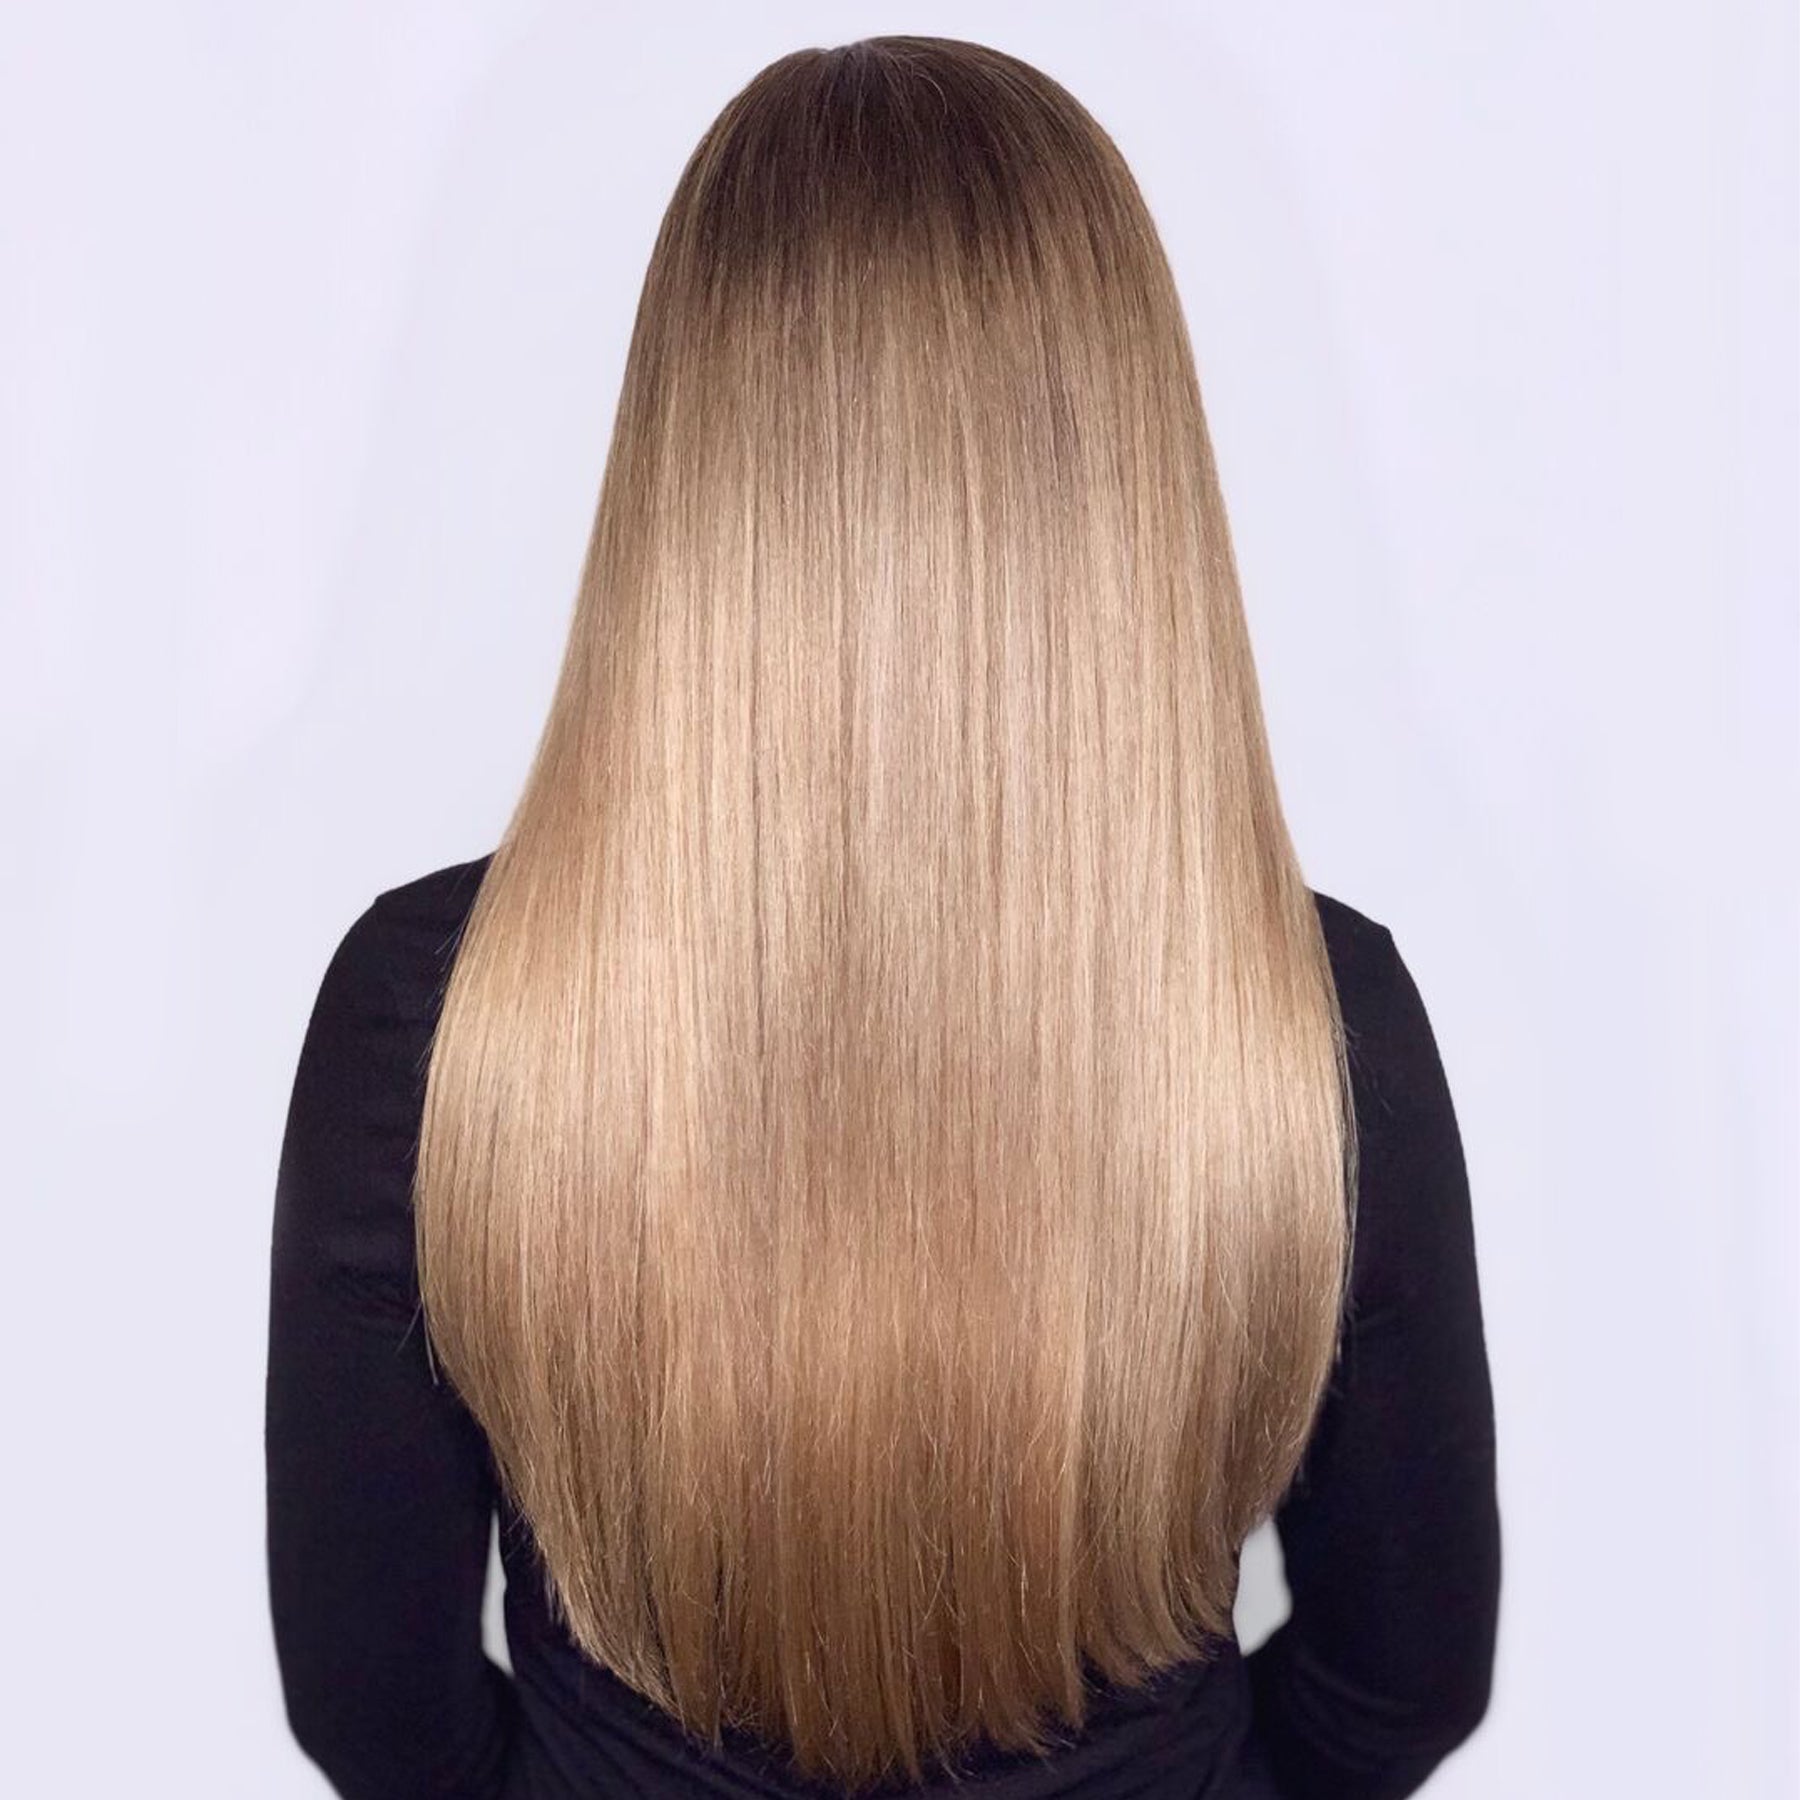 Smooth and shining blonde woman hair after using the Olaplex No. 5 Bond Maintenance Conditioner.